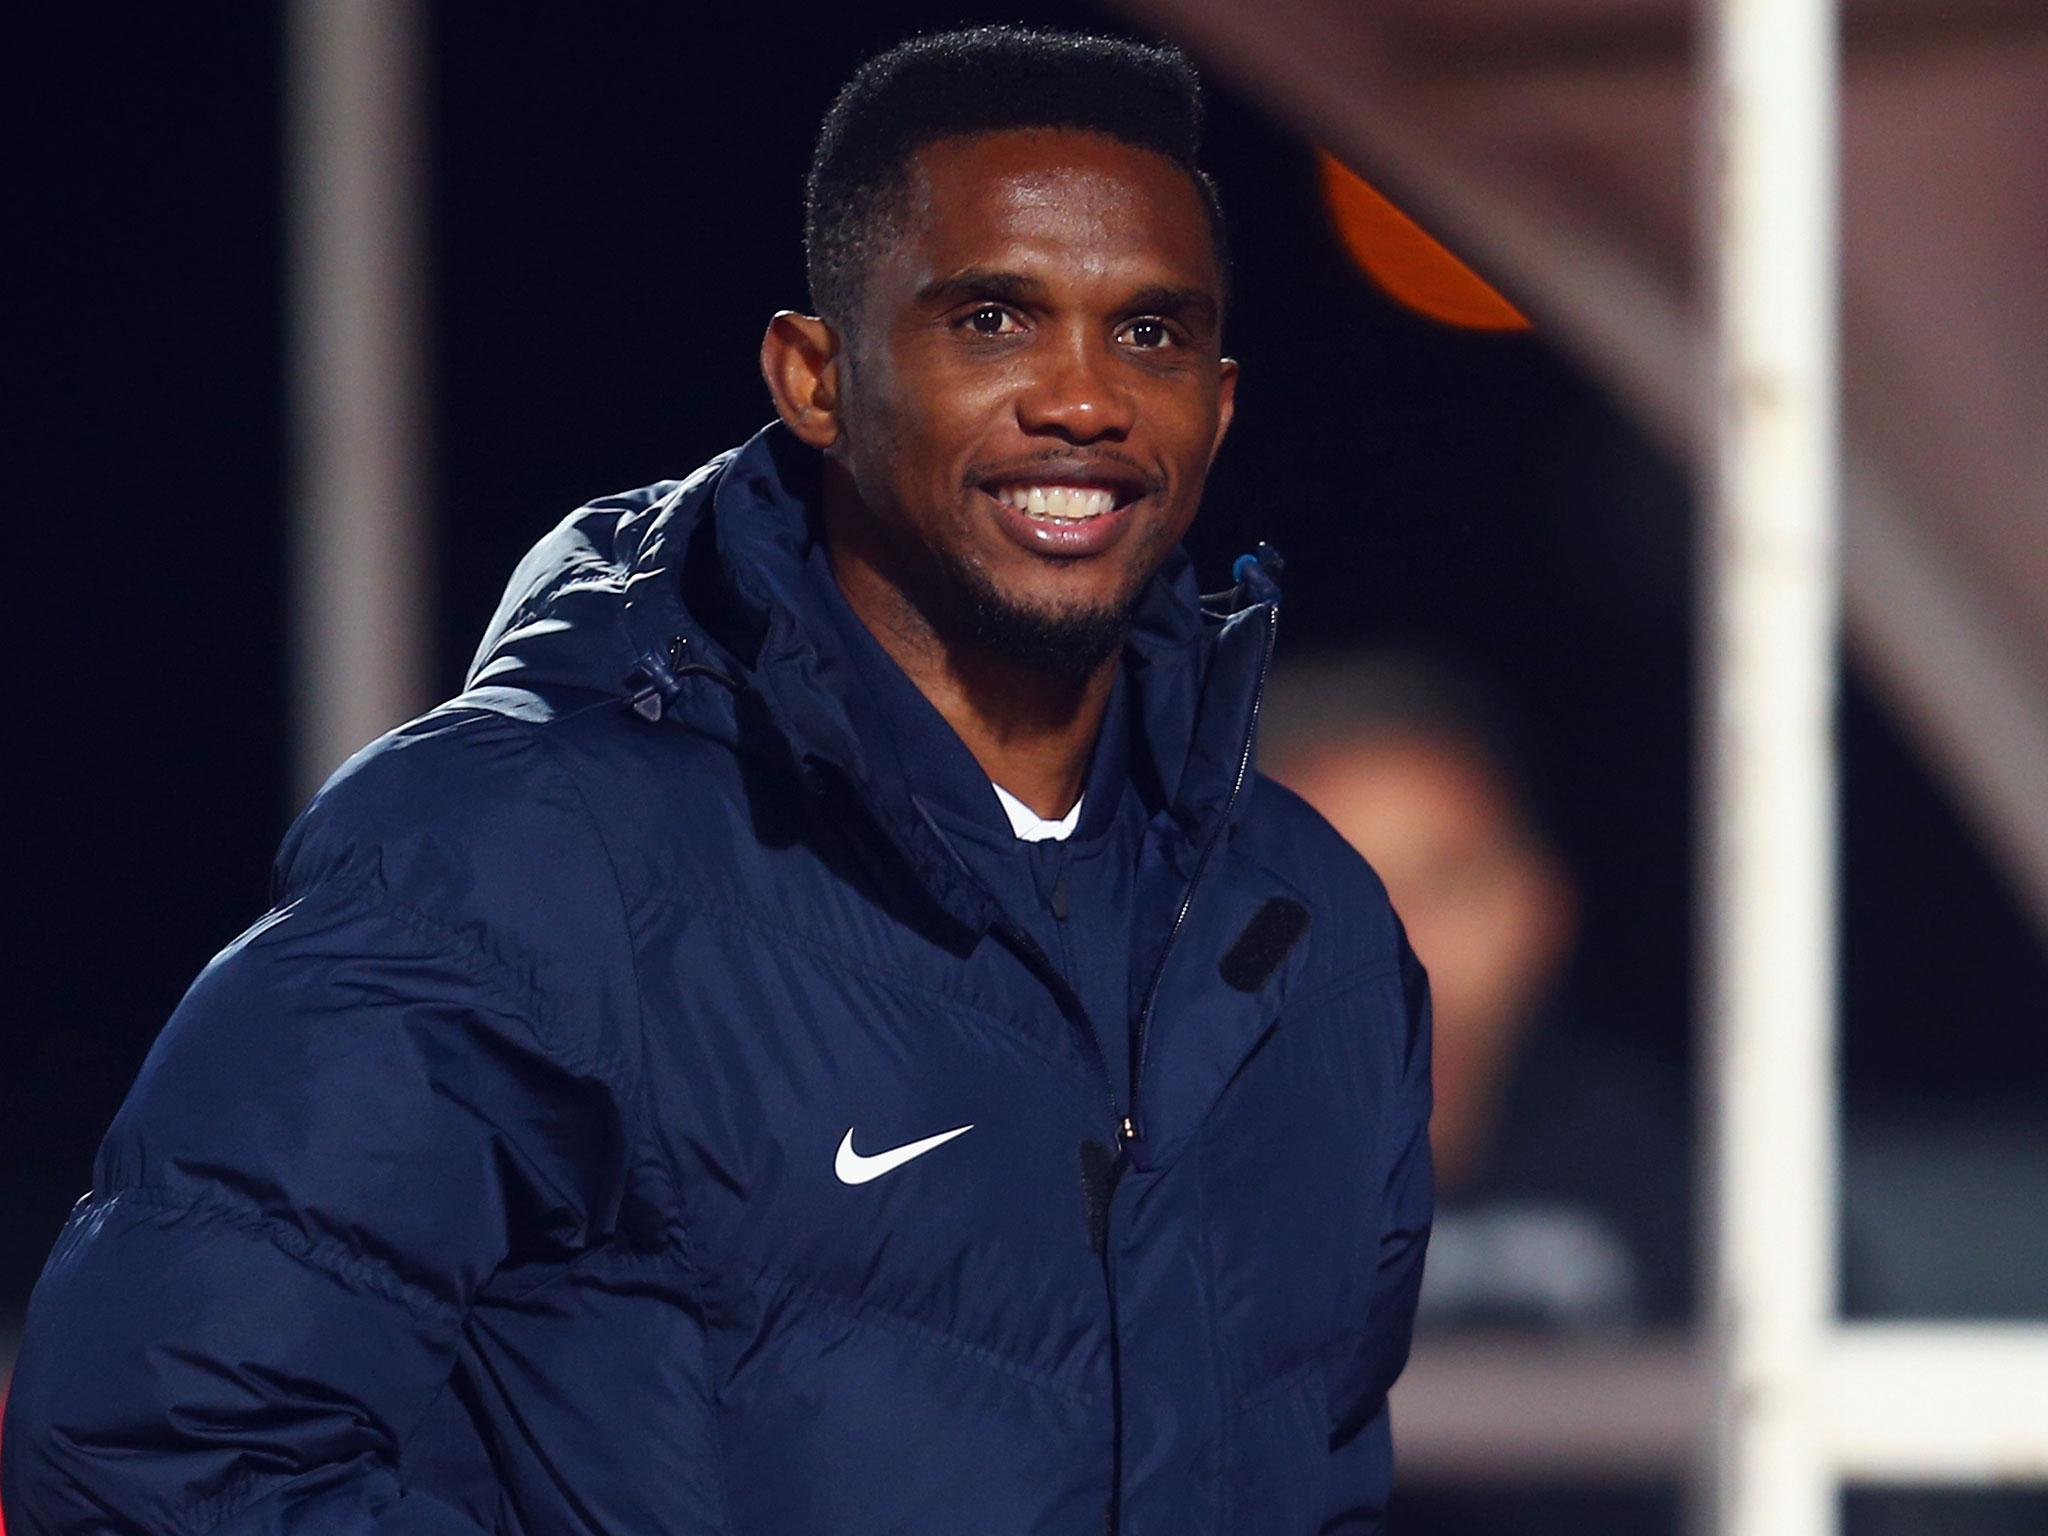 Samuel Eto'o could face more than 10 years in prison if he is found guilty of tax fraud